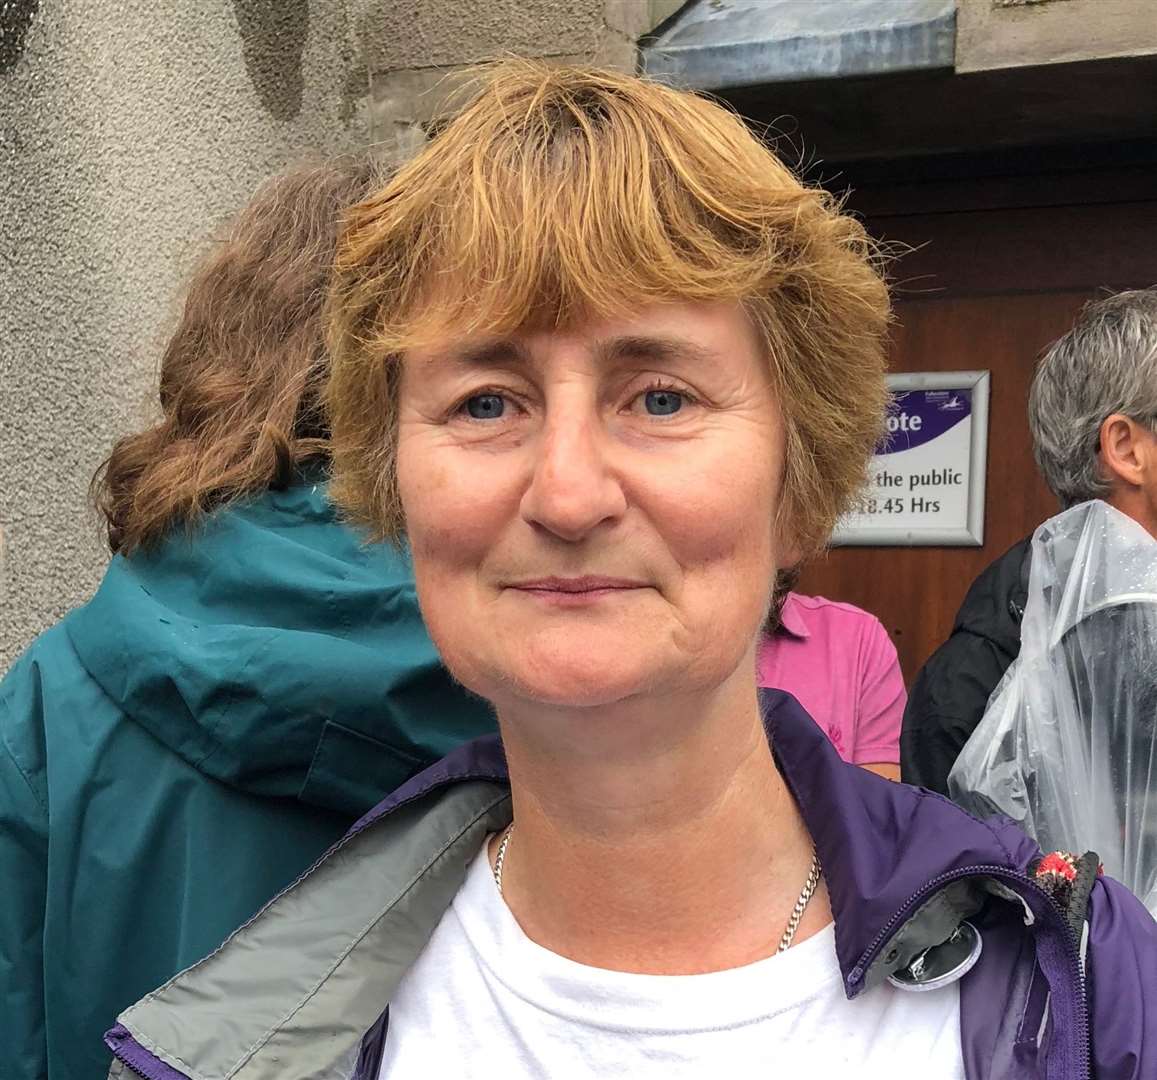 Green councillor Lesley Whybrow is also part of the Save Princes Parade campaign group